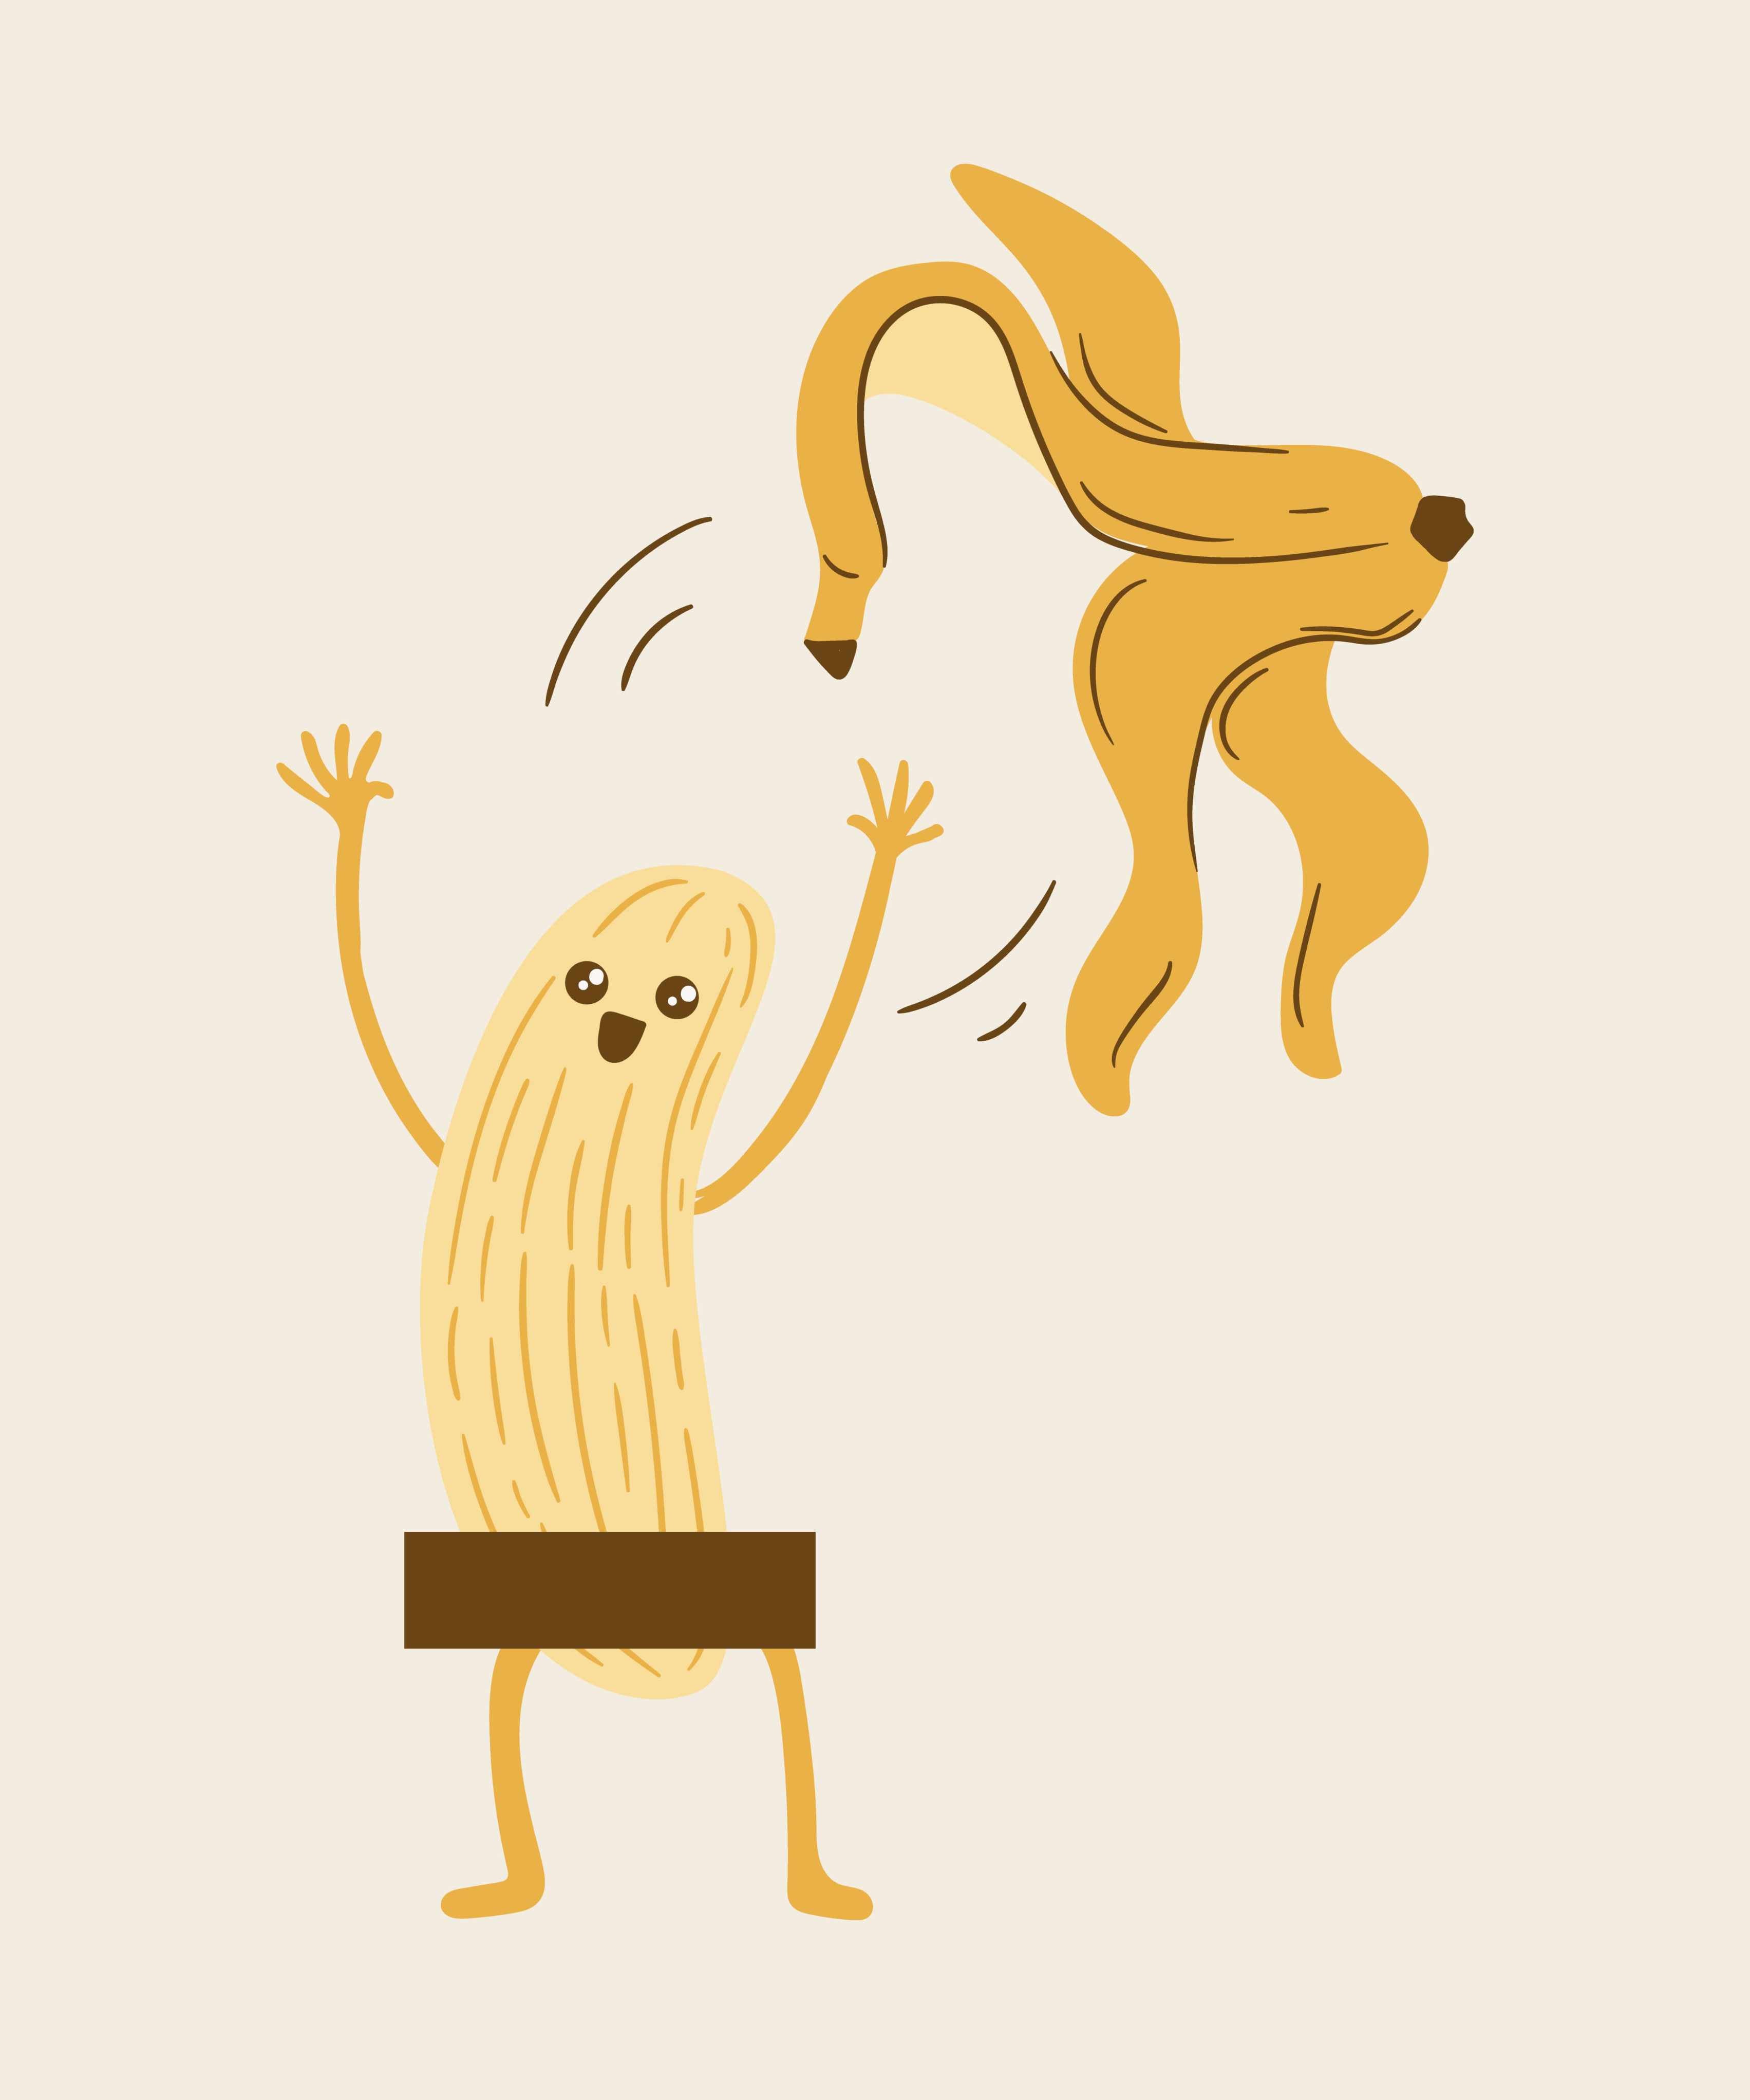 An illustration of a Naked Banana T-Shirt and a dog, promoting the idea of "free the fruit" with a touch of banana humor.